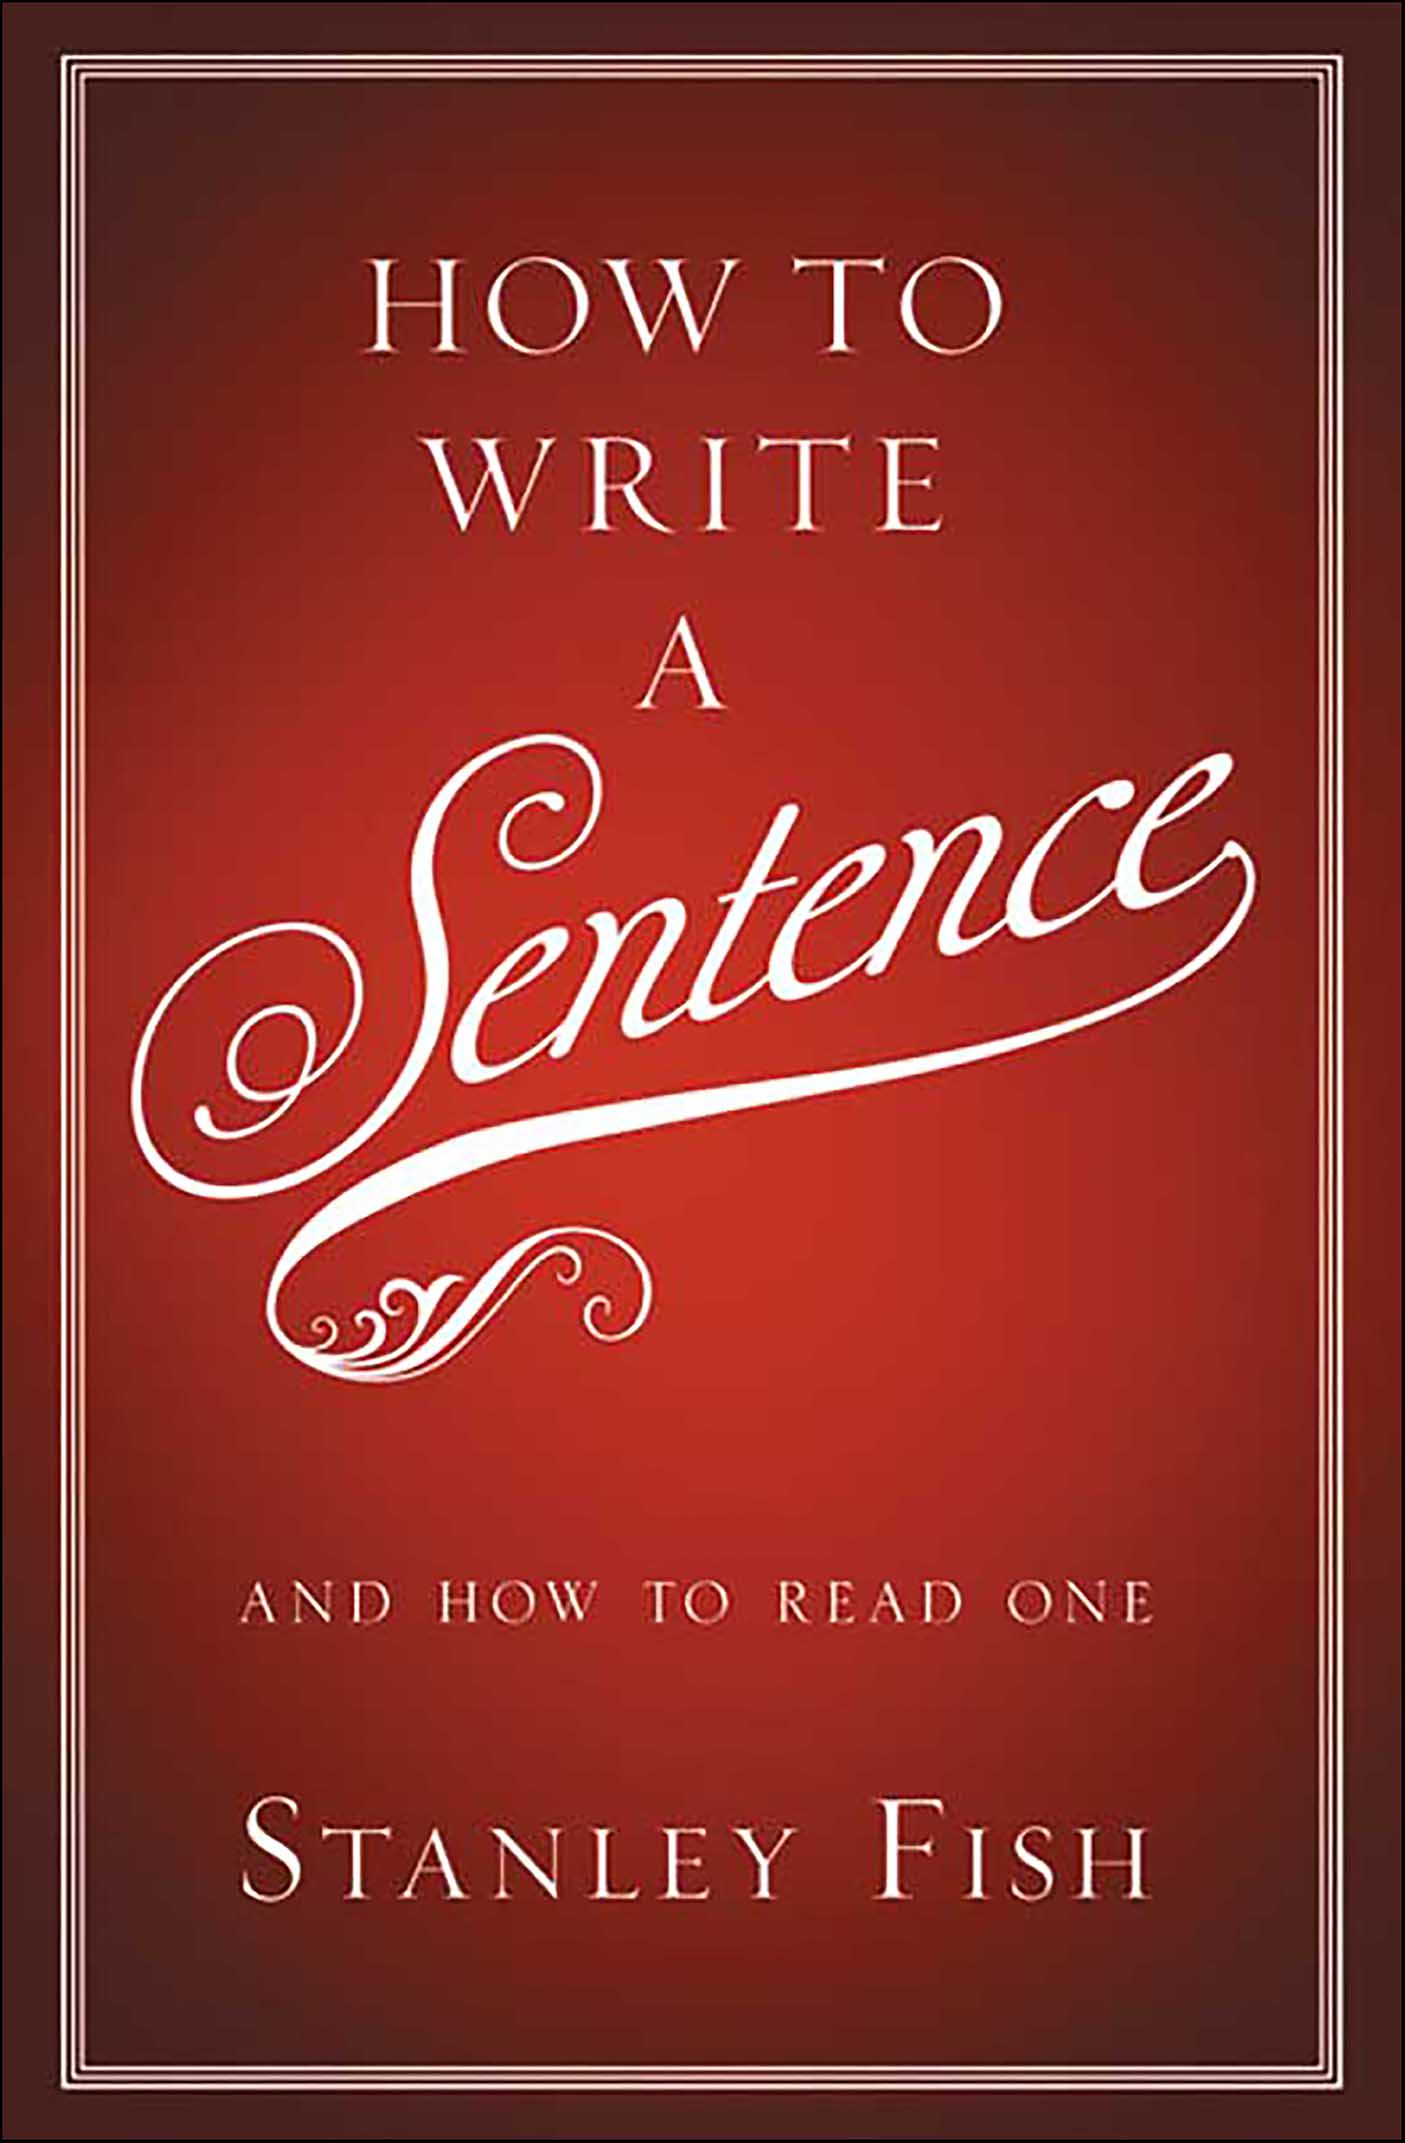 How to write a sentence and how to read one cover image